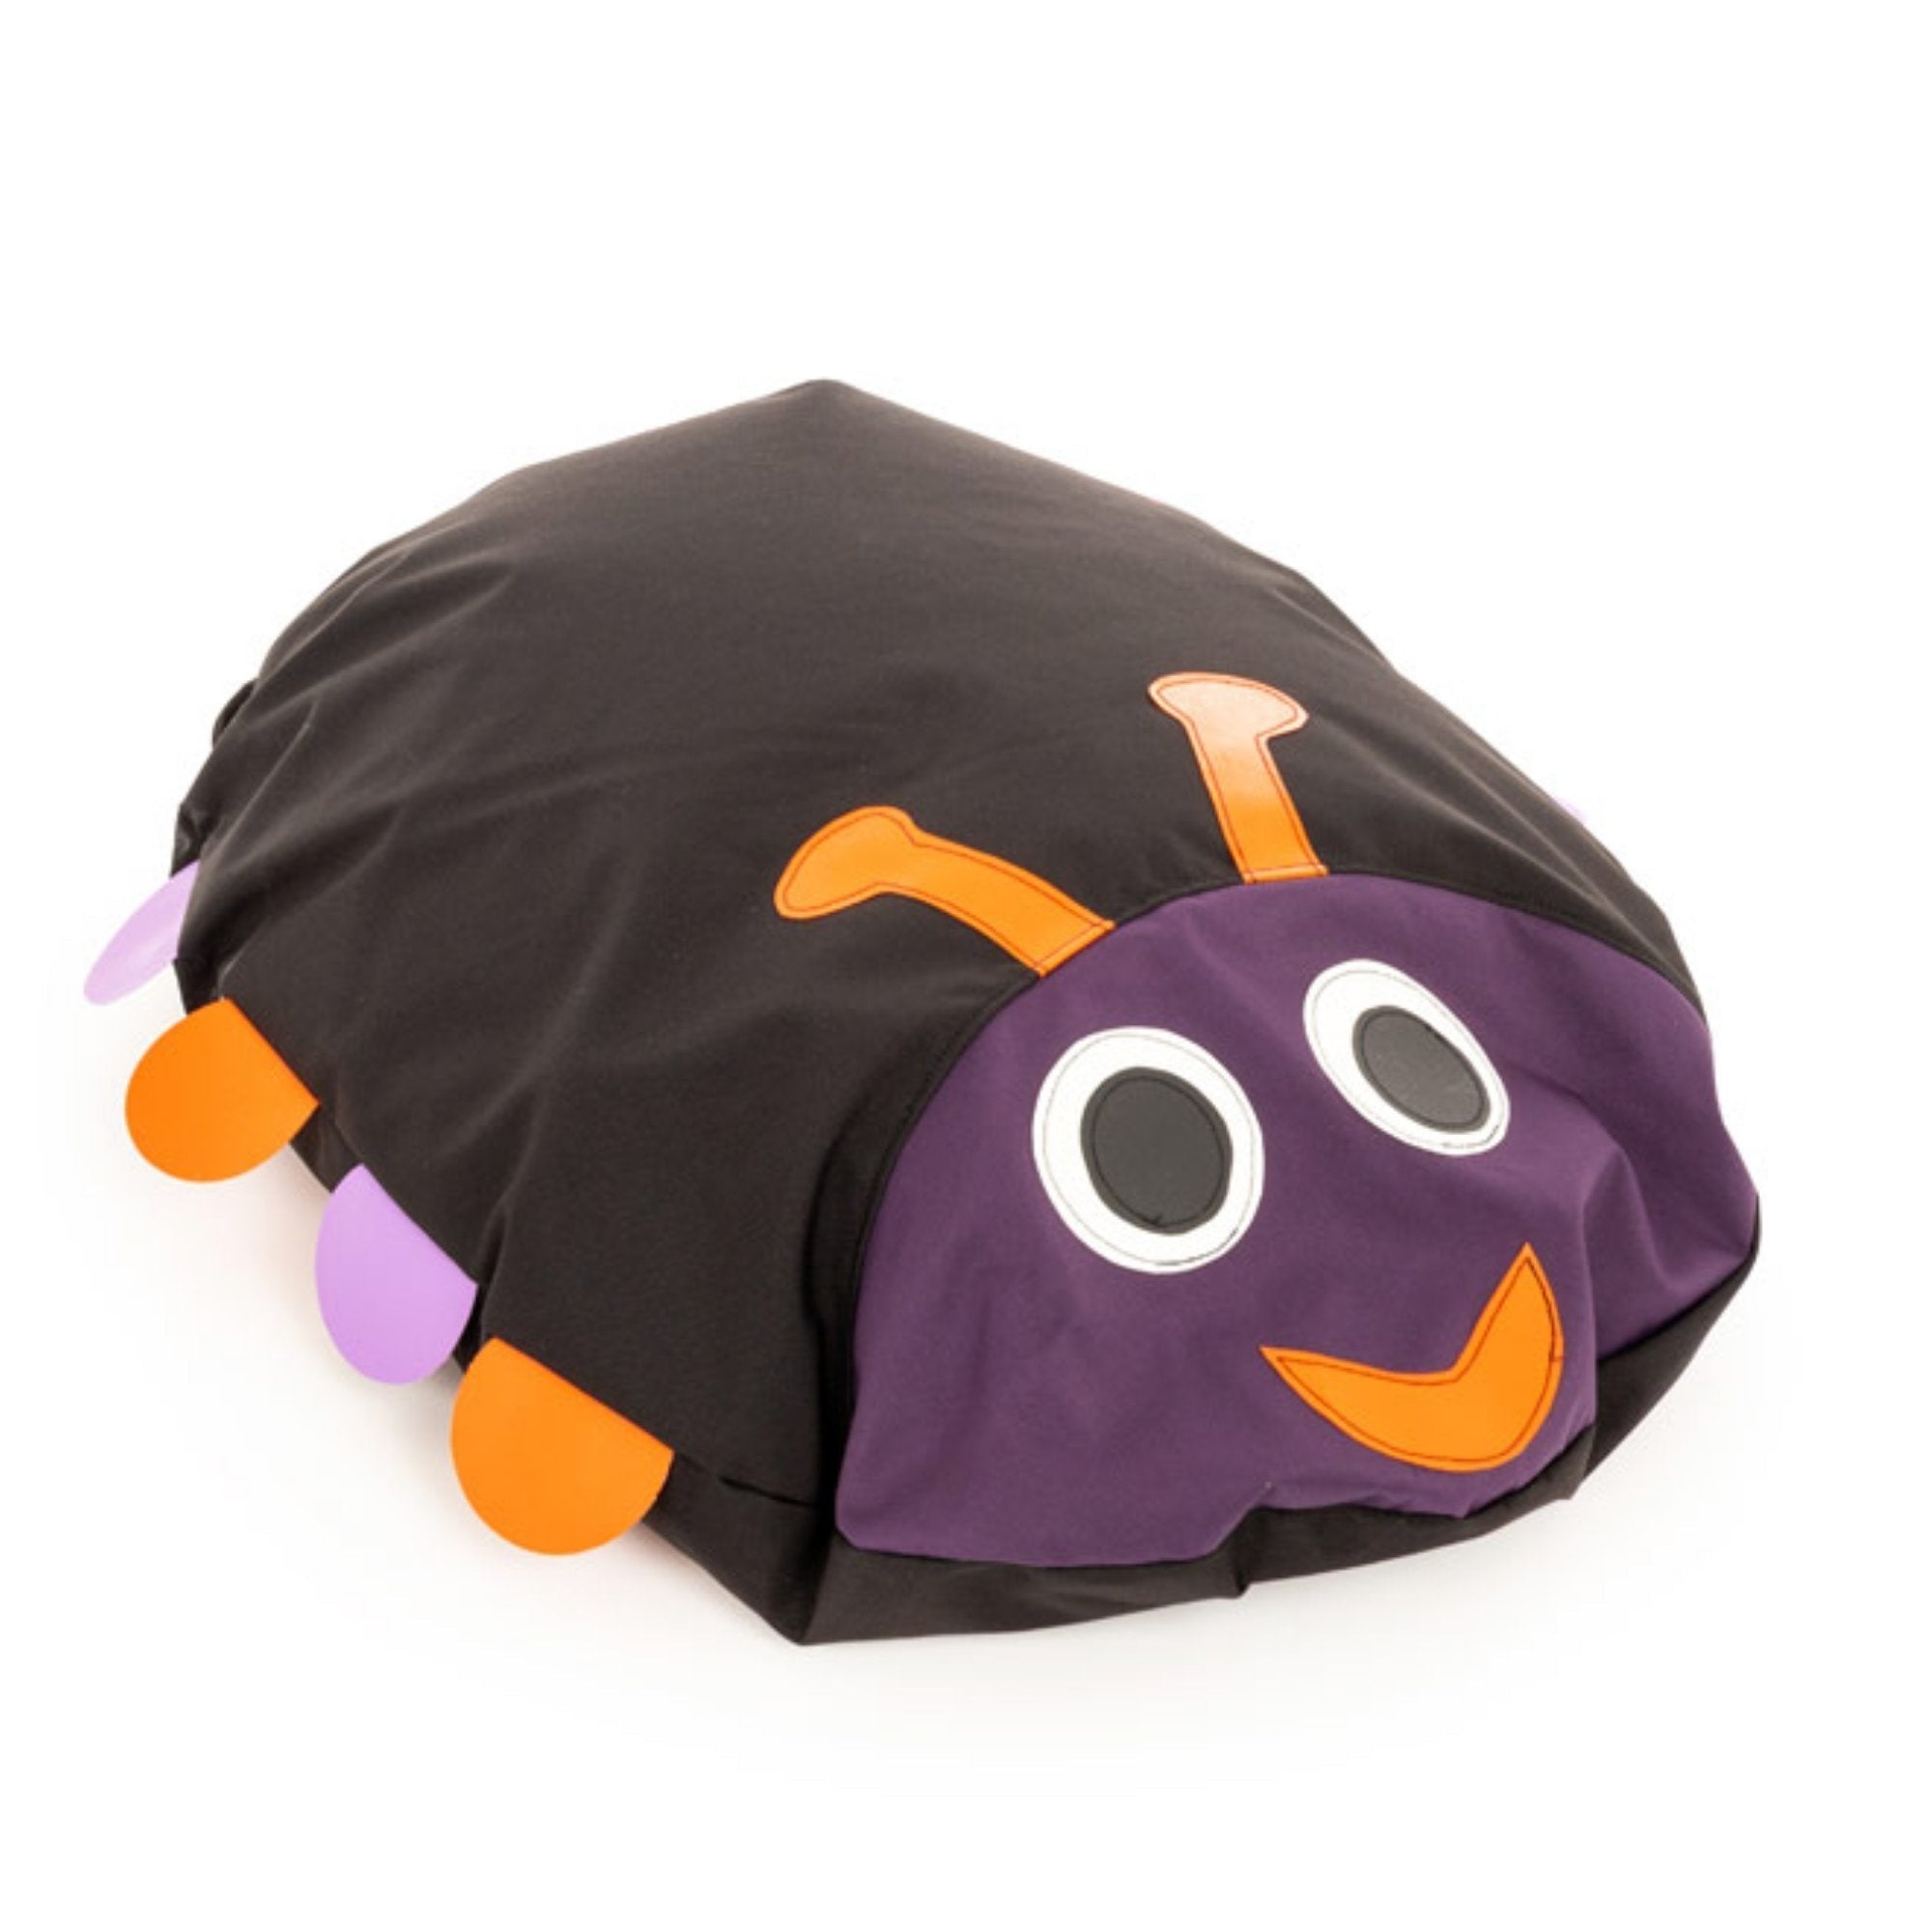 Cosy Friends Spider Cushion, Create the perfect learning atmosphere in the classroom with the Cosy Friends Spider Cushion The Cosy Friends Spider Cushion is a colourful stylish addition to any classroom setting with vibrant colours that will create a delightful focal point. Children will love the vibrant colours these Cosy Friends Spider Cushion add to your room. These Fun Creature Bean Bags are designed for seating all around the nursery. The loveable designs each represent species from the world of mini b